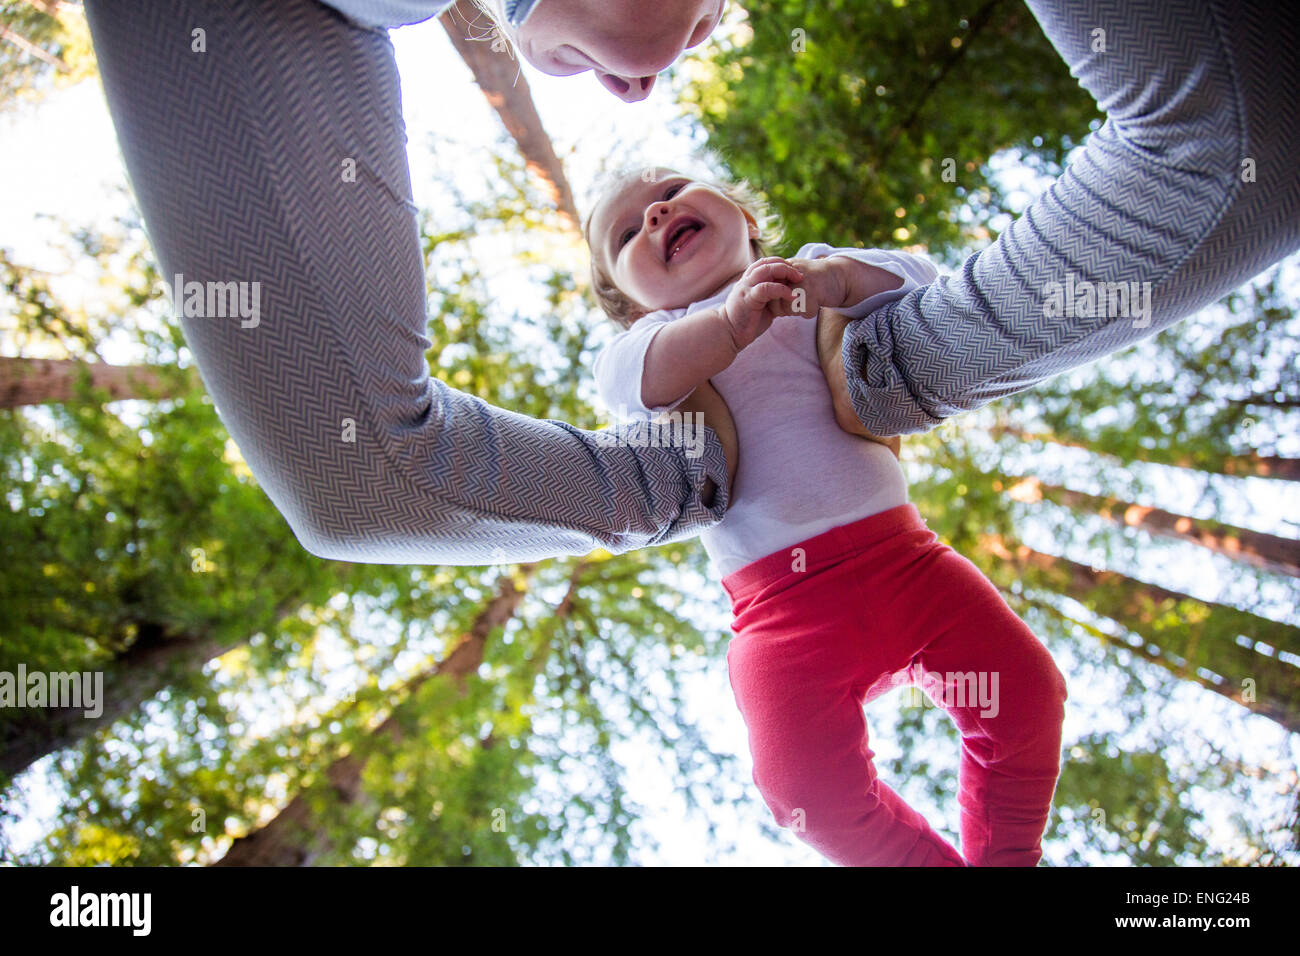 Low angle view of Caucasian mother playing with baby under trees Stock Photo